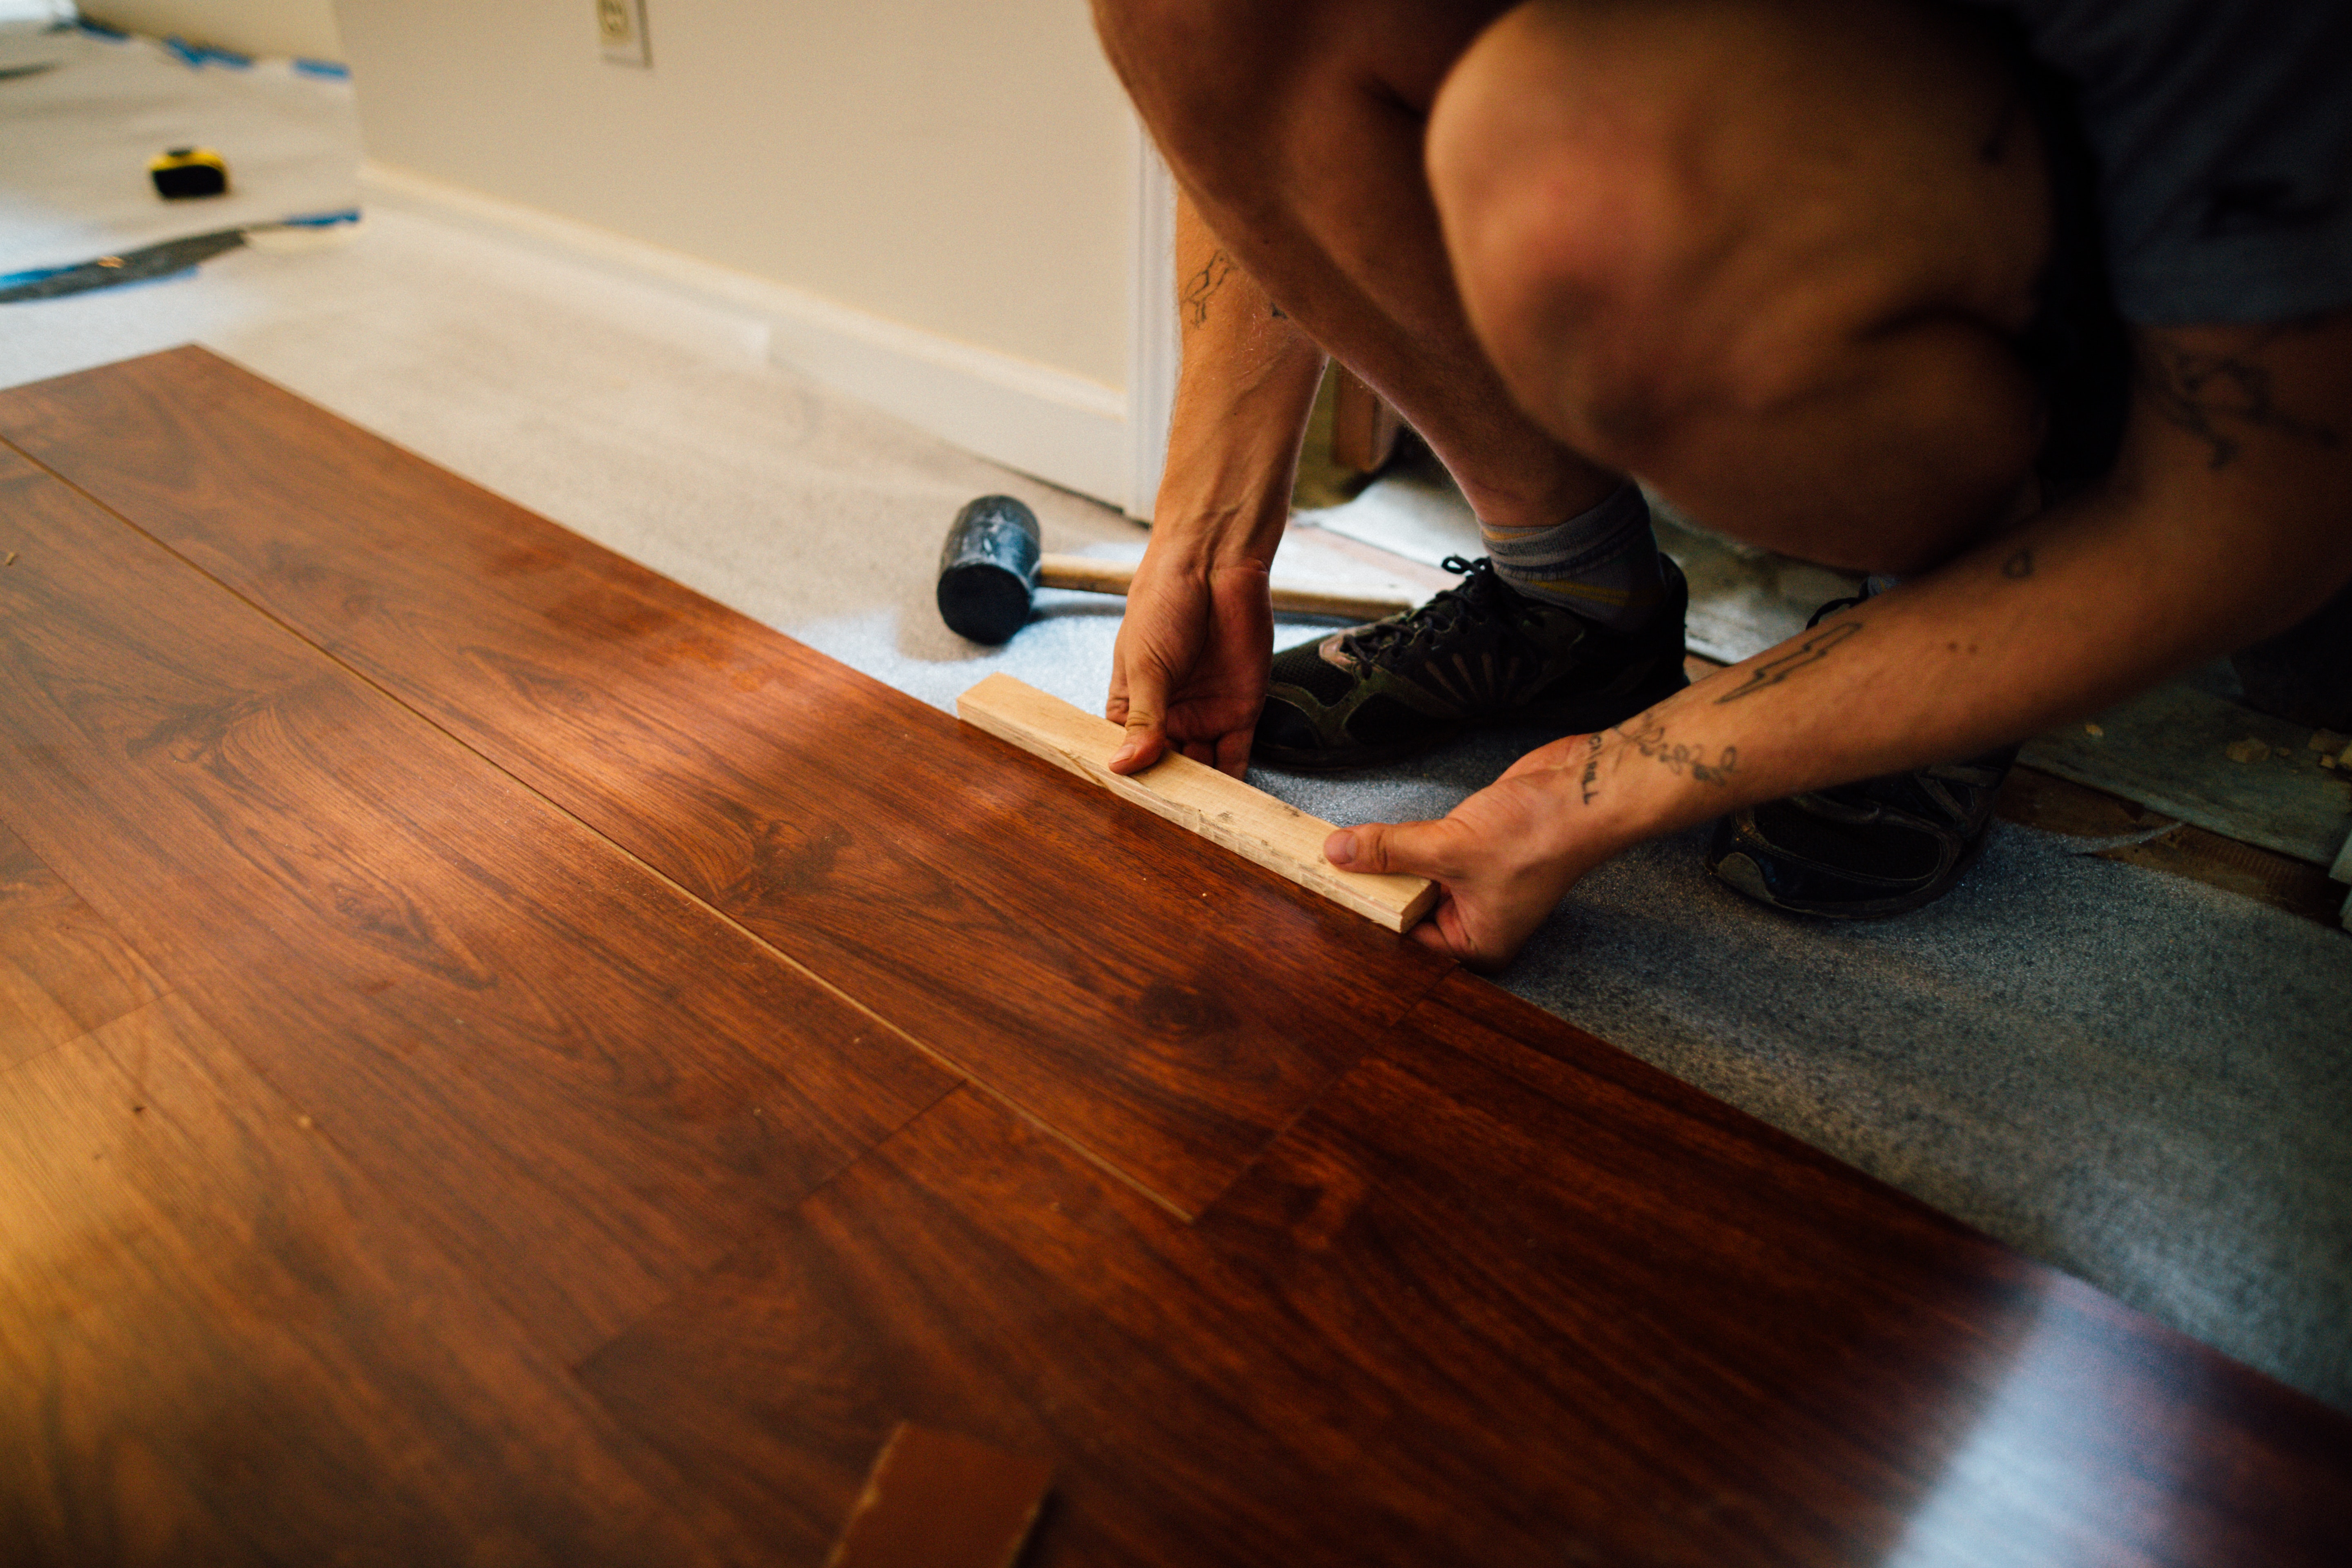 Stock photo of man leaning down to measure and install new hardwood flooring.